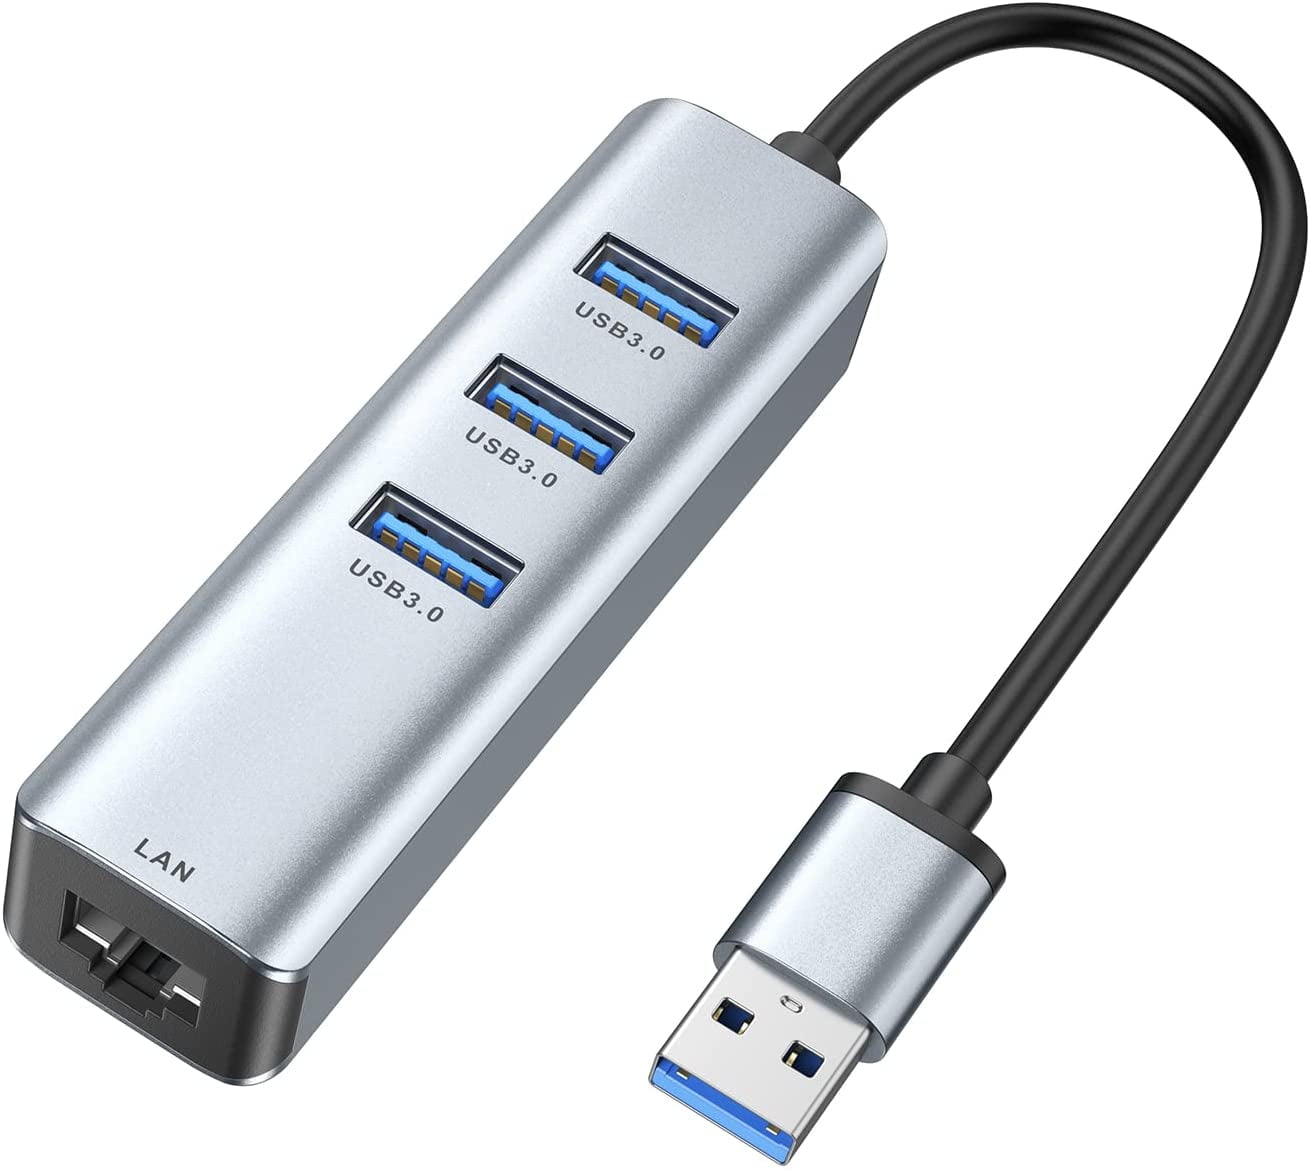 Sølv Flagermus Han USB 3.0 to Ethernet Adapter,3-Port USB 3.0 Hub with RJ45 10/100/1000  Gigabit Ethernet Adapter Support Windows 10,8.1,Mac OS, Surface  Pro,Linux,Chromebook and More - Walmart.com